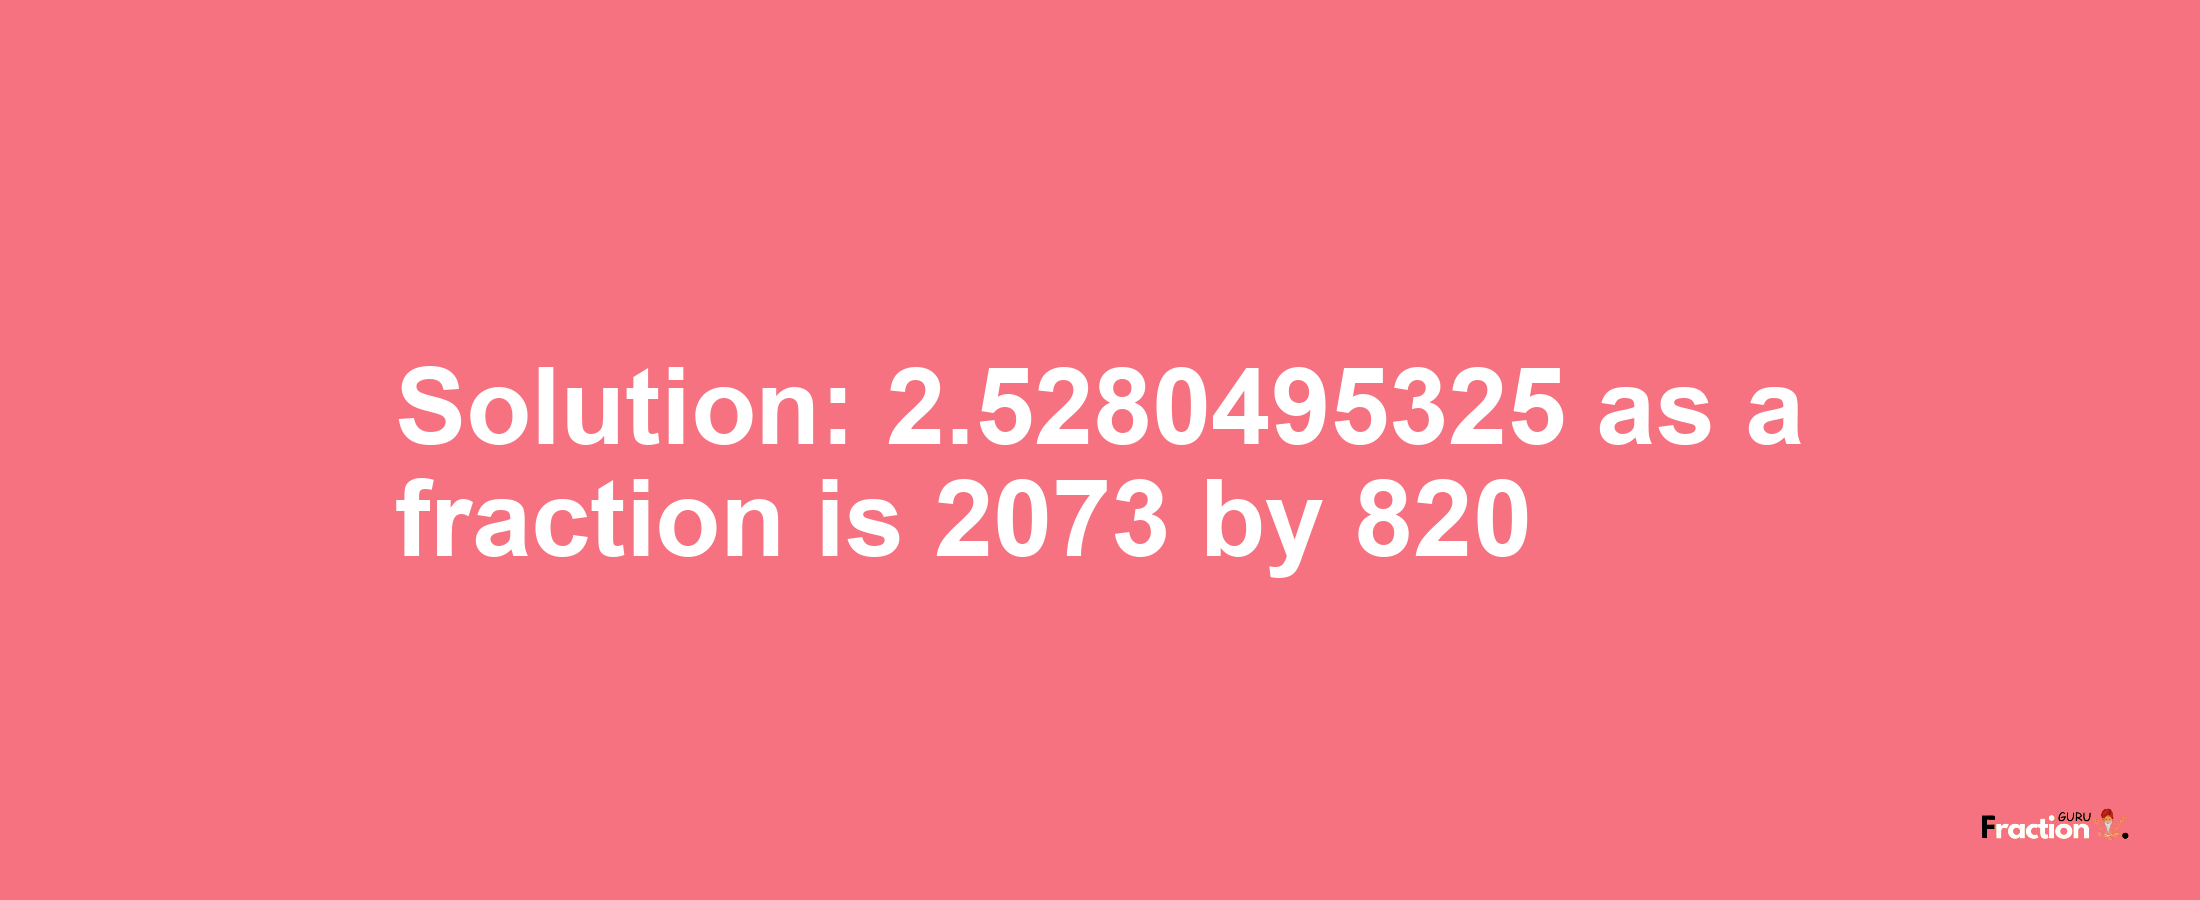 Solution:2.5280495325 as a fraction is 2073/820